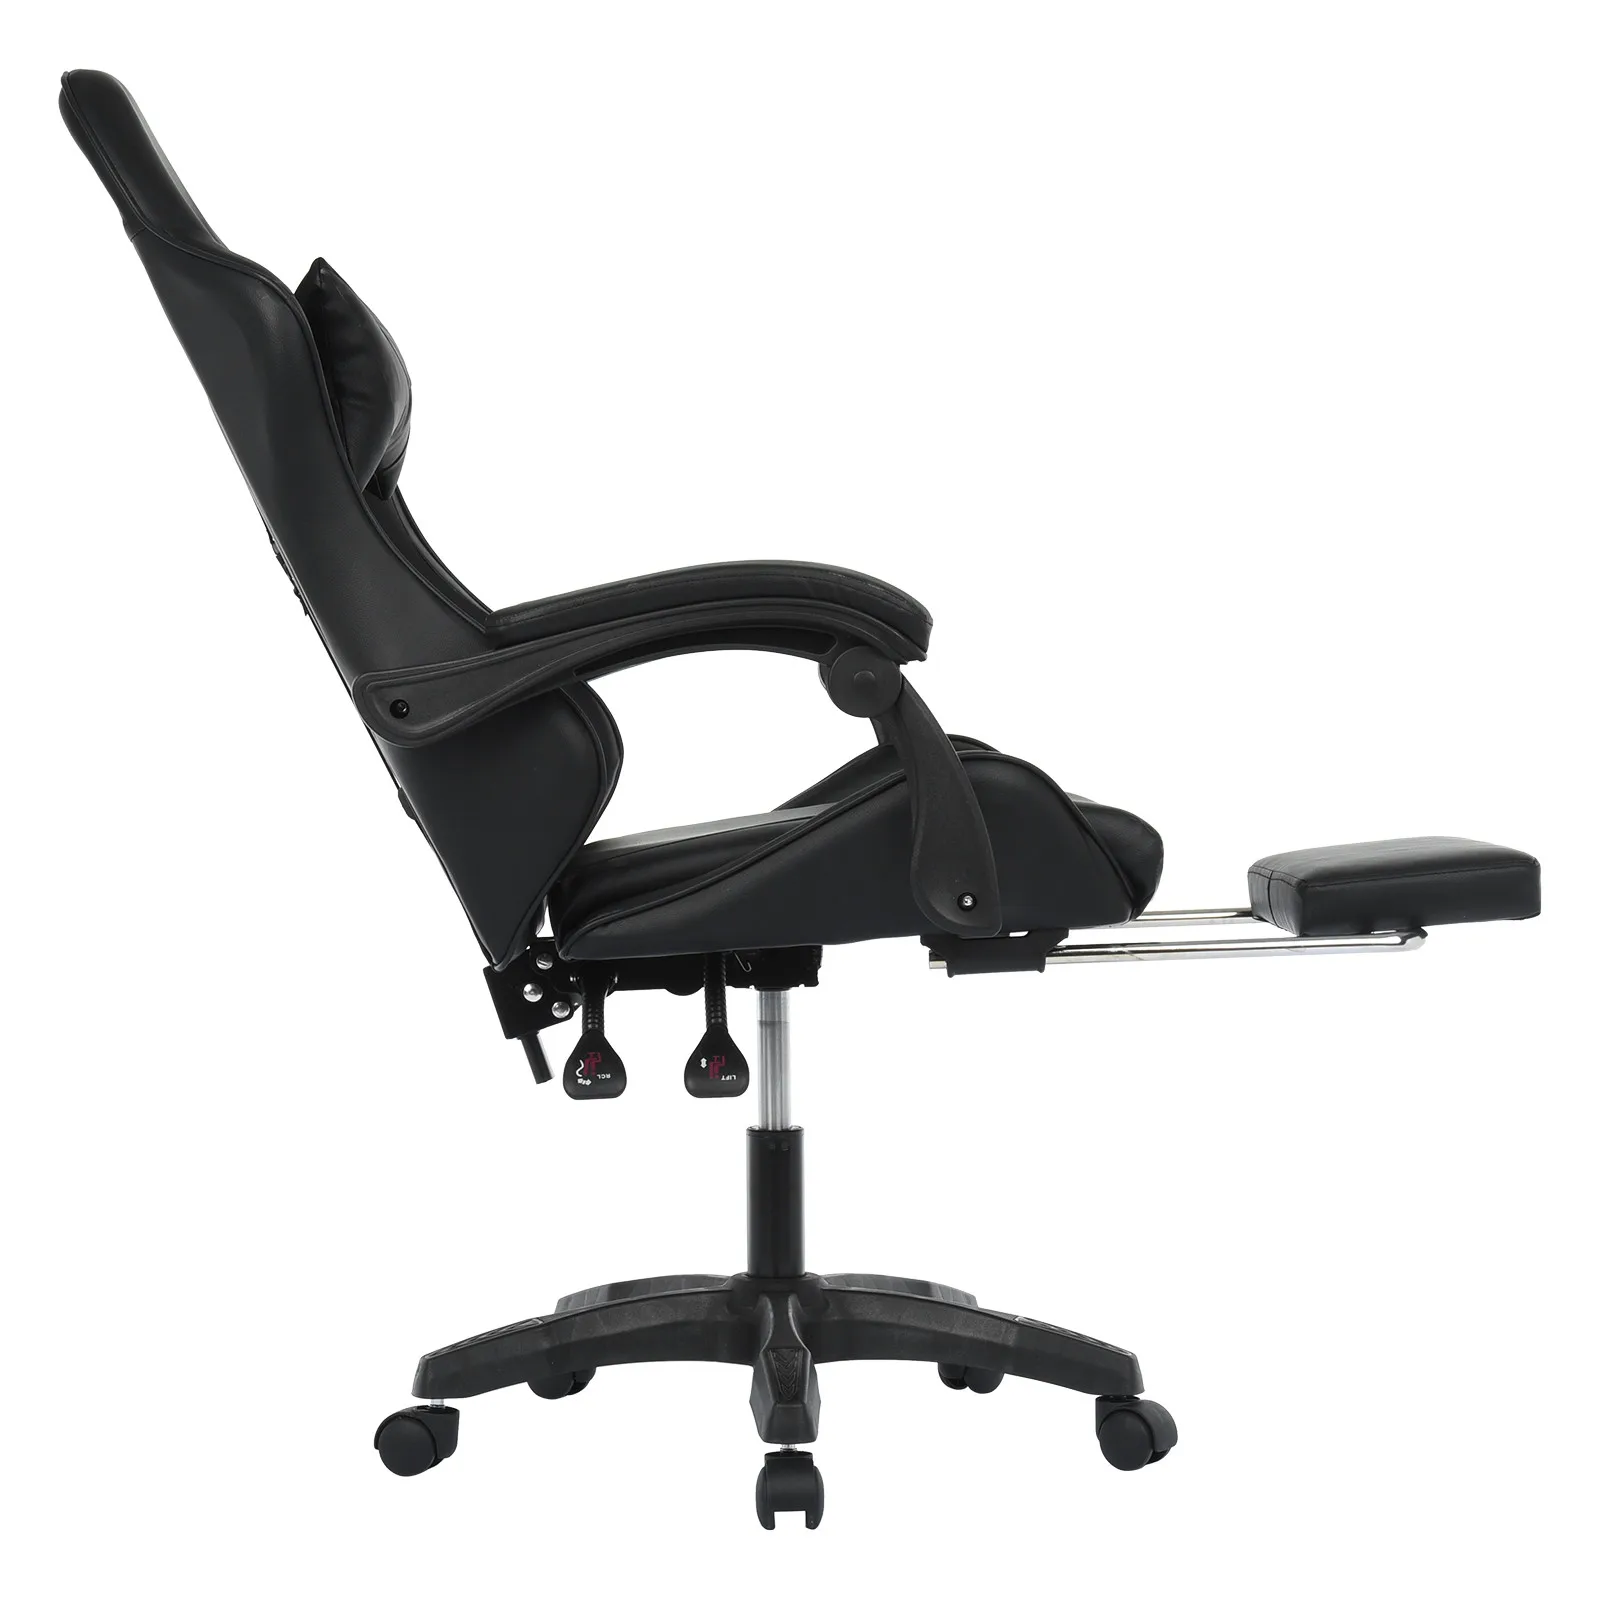 

Ergonomic Gaming Chair With Footrest Adjustable Backrest Reclining Leather Executive Computer Office Chair Swivel Gamer Chair